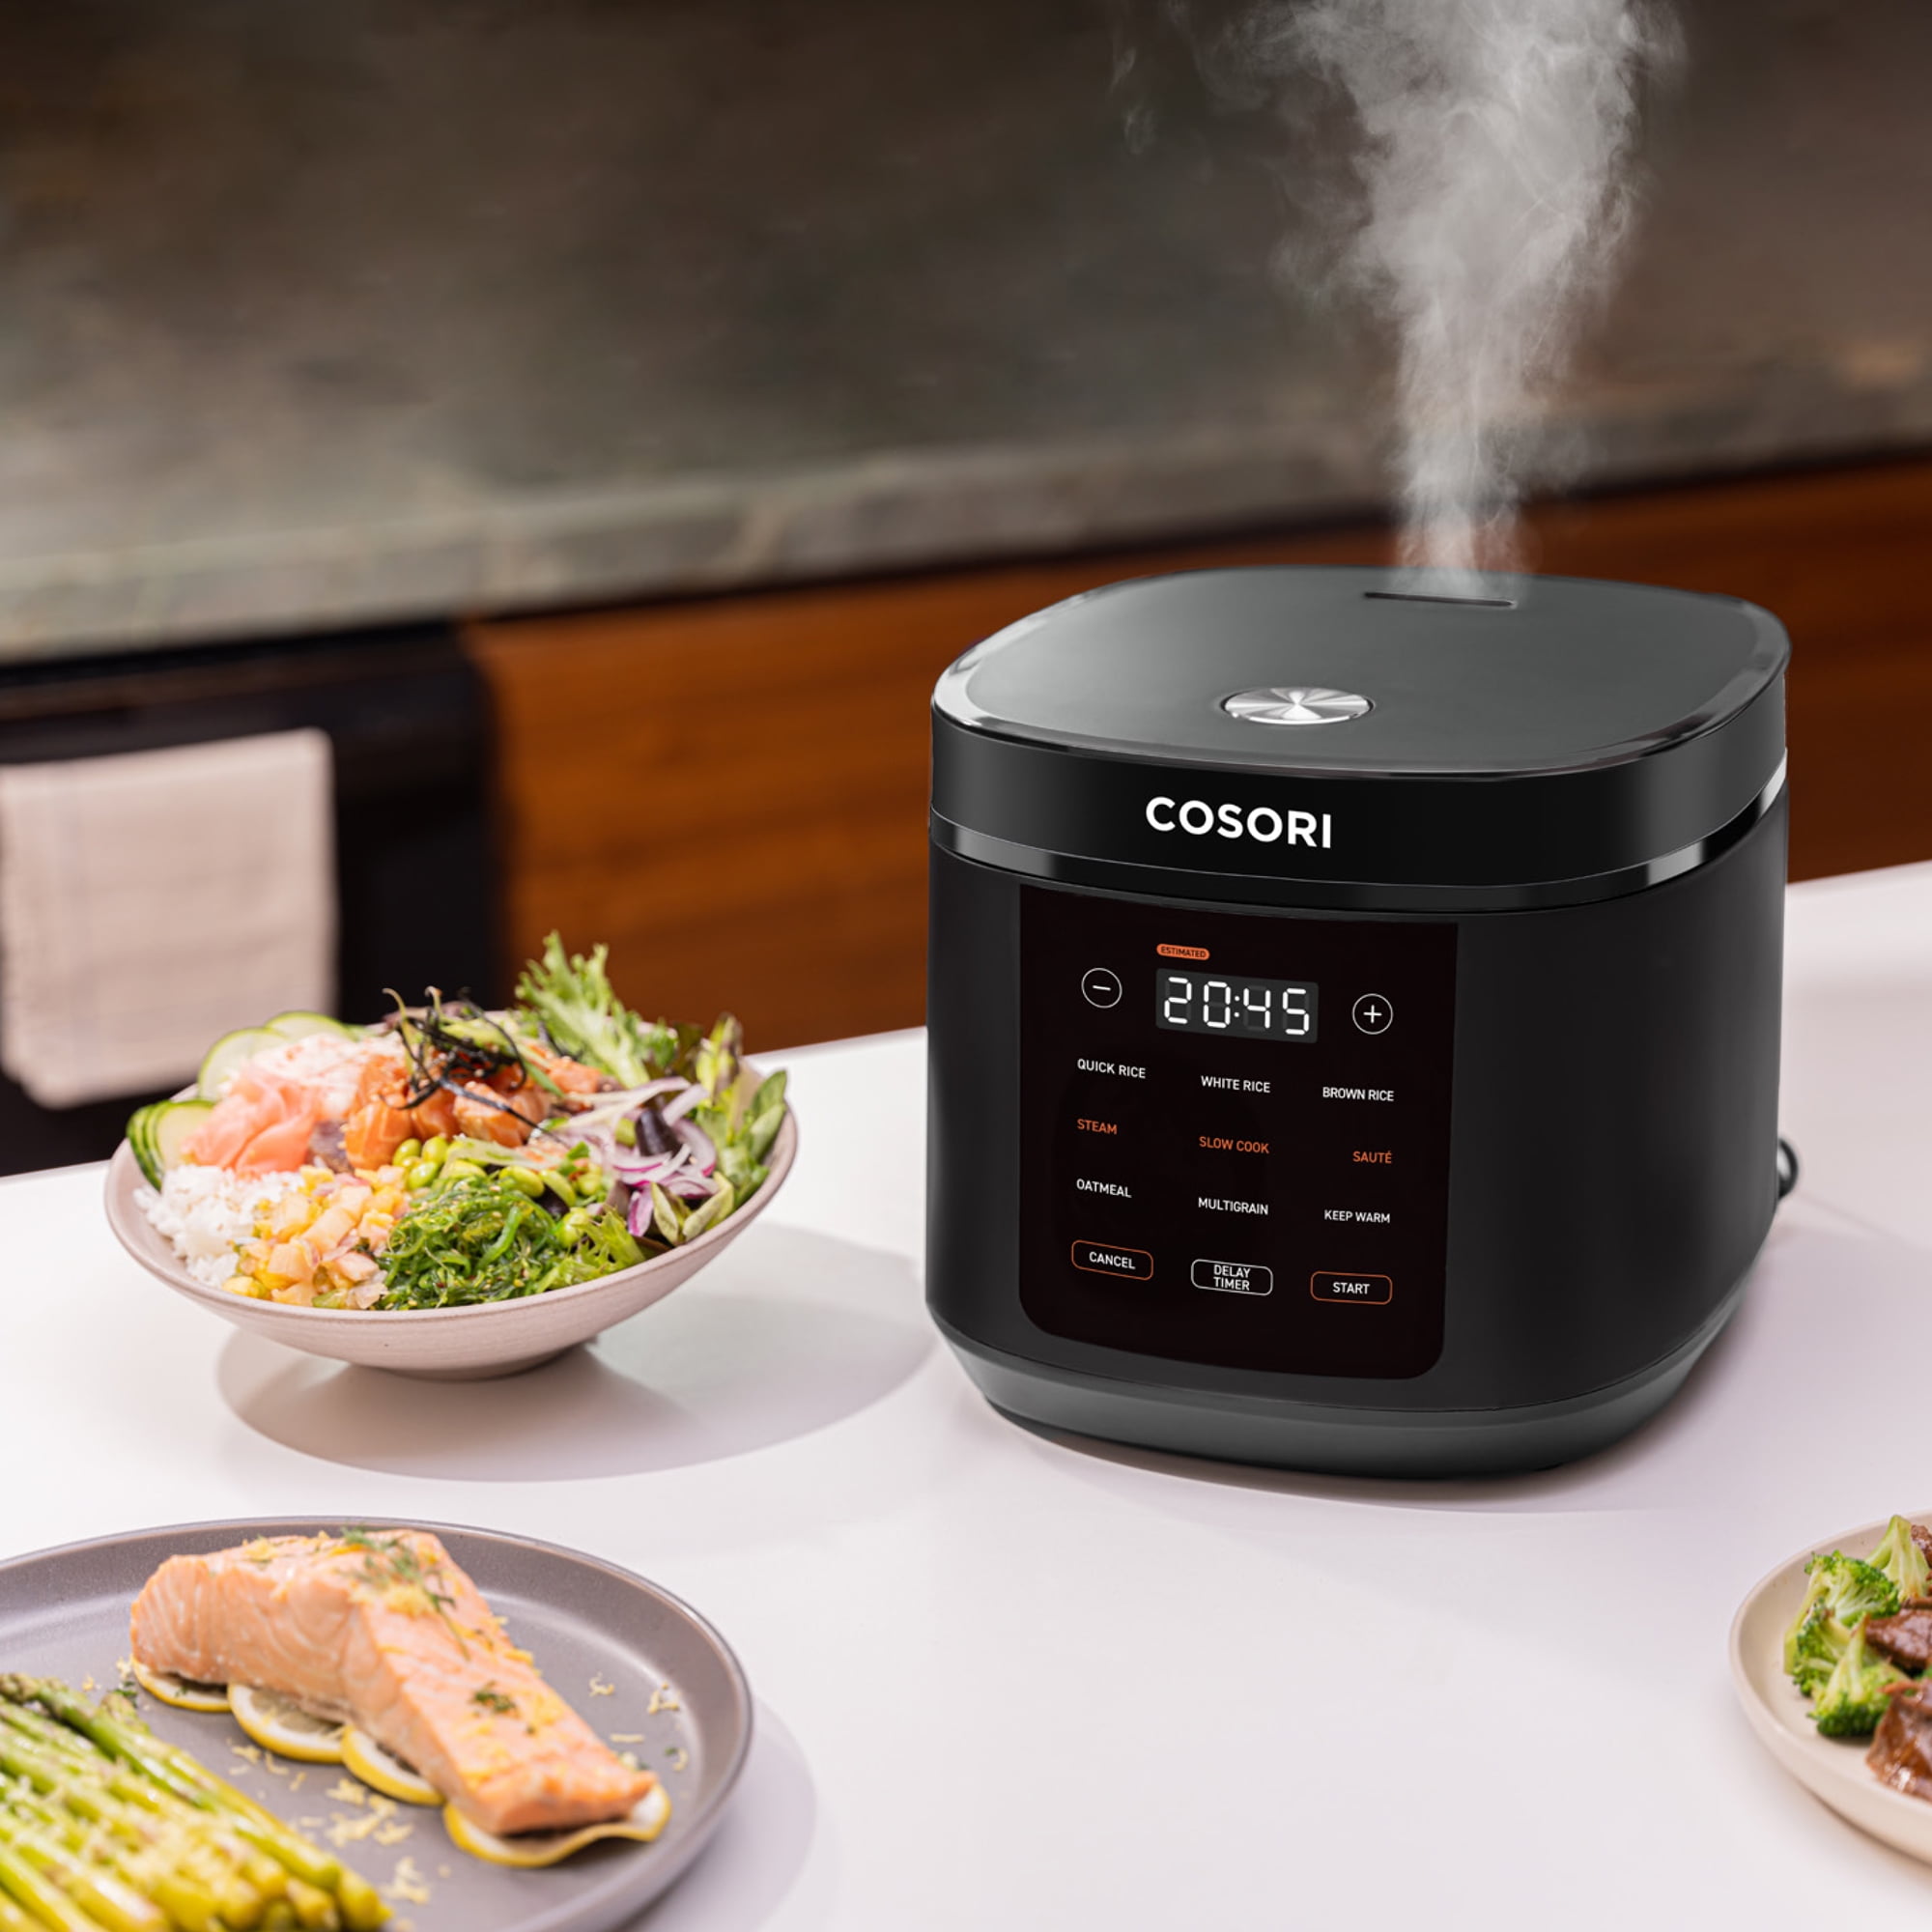 COSORI Rice Cooker Large Maker 10 Cup Uncooked 18 Functions, Japanese Style  Fuzzy Logic Micom Technology, Texture Optional, 50 Recipes, Stainless Steel  Steamer, Warmer, Timer, Olla Arrocera Electrica,Black